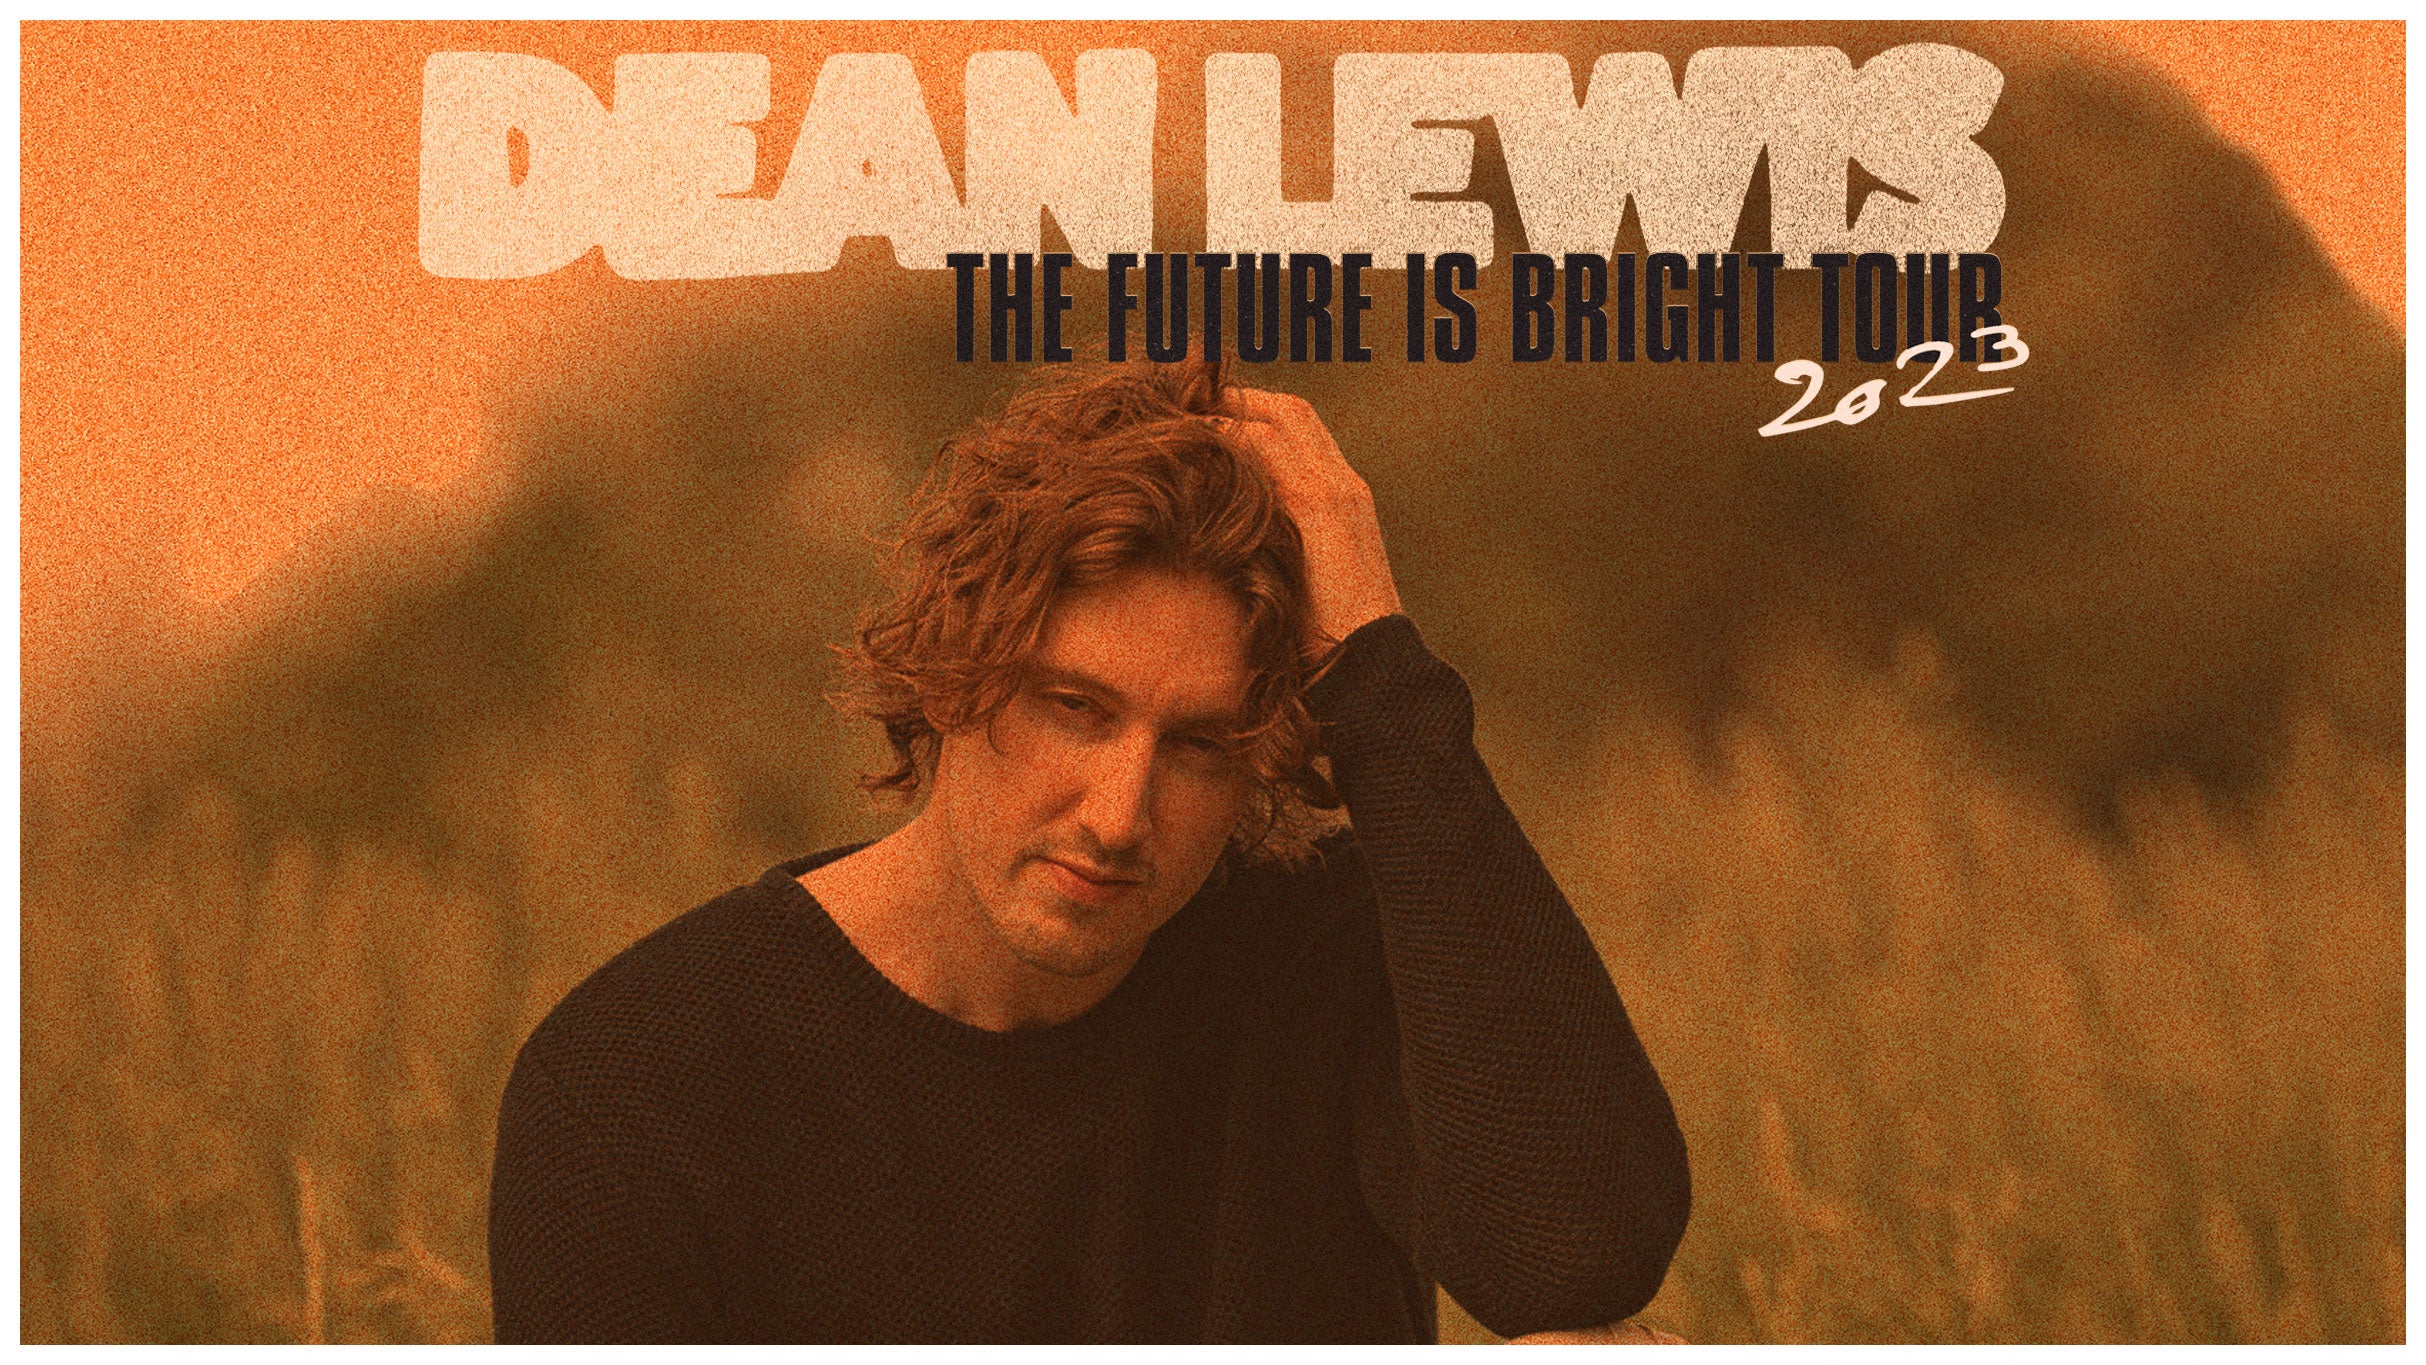 Image used with permission from Ticketmaster | Dean Lewis w/ Sara Kays tickets